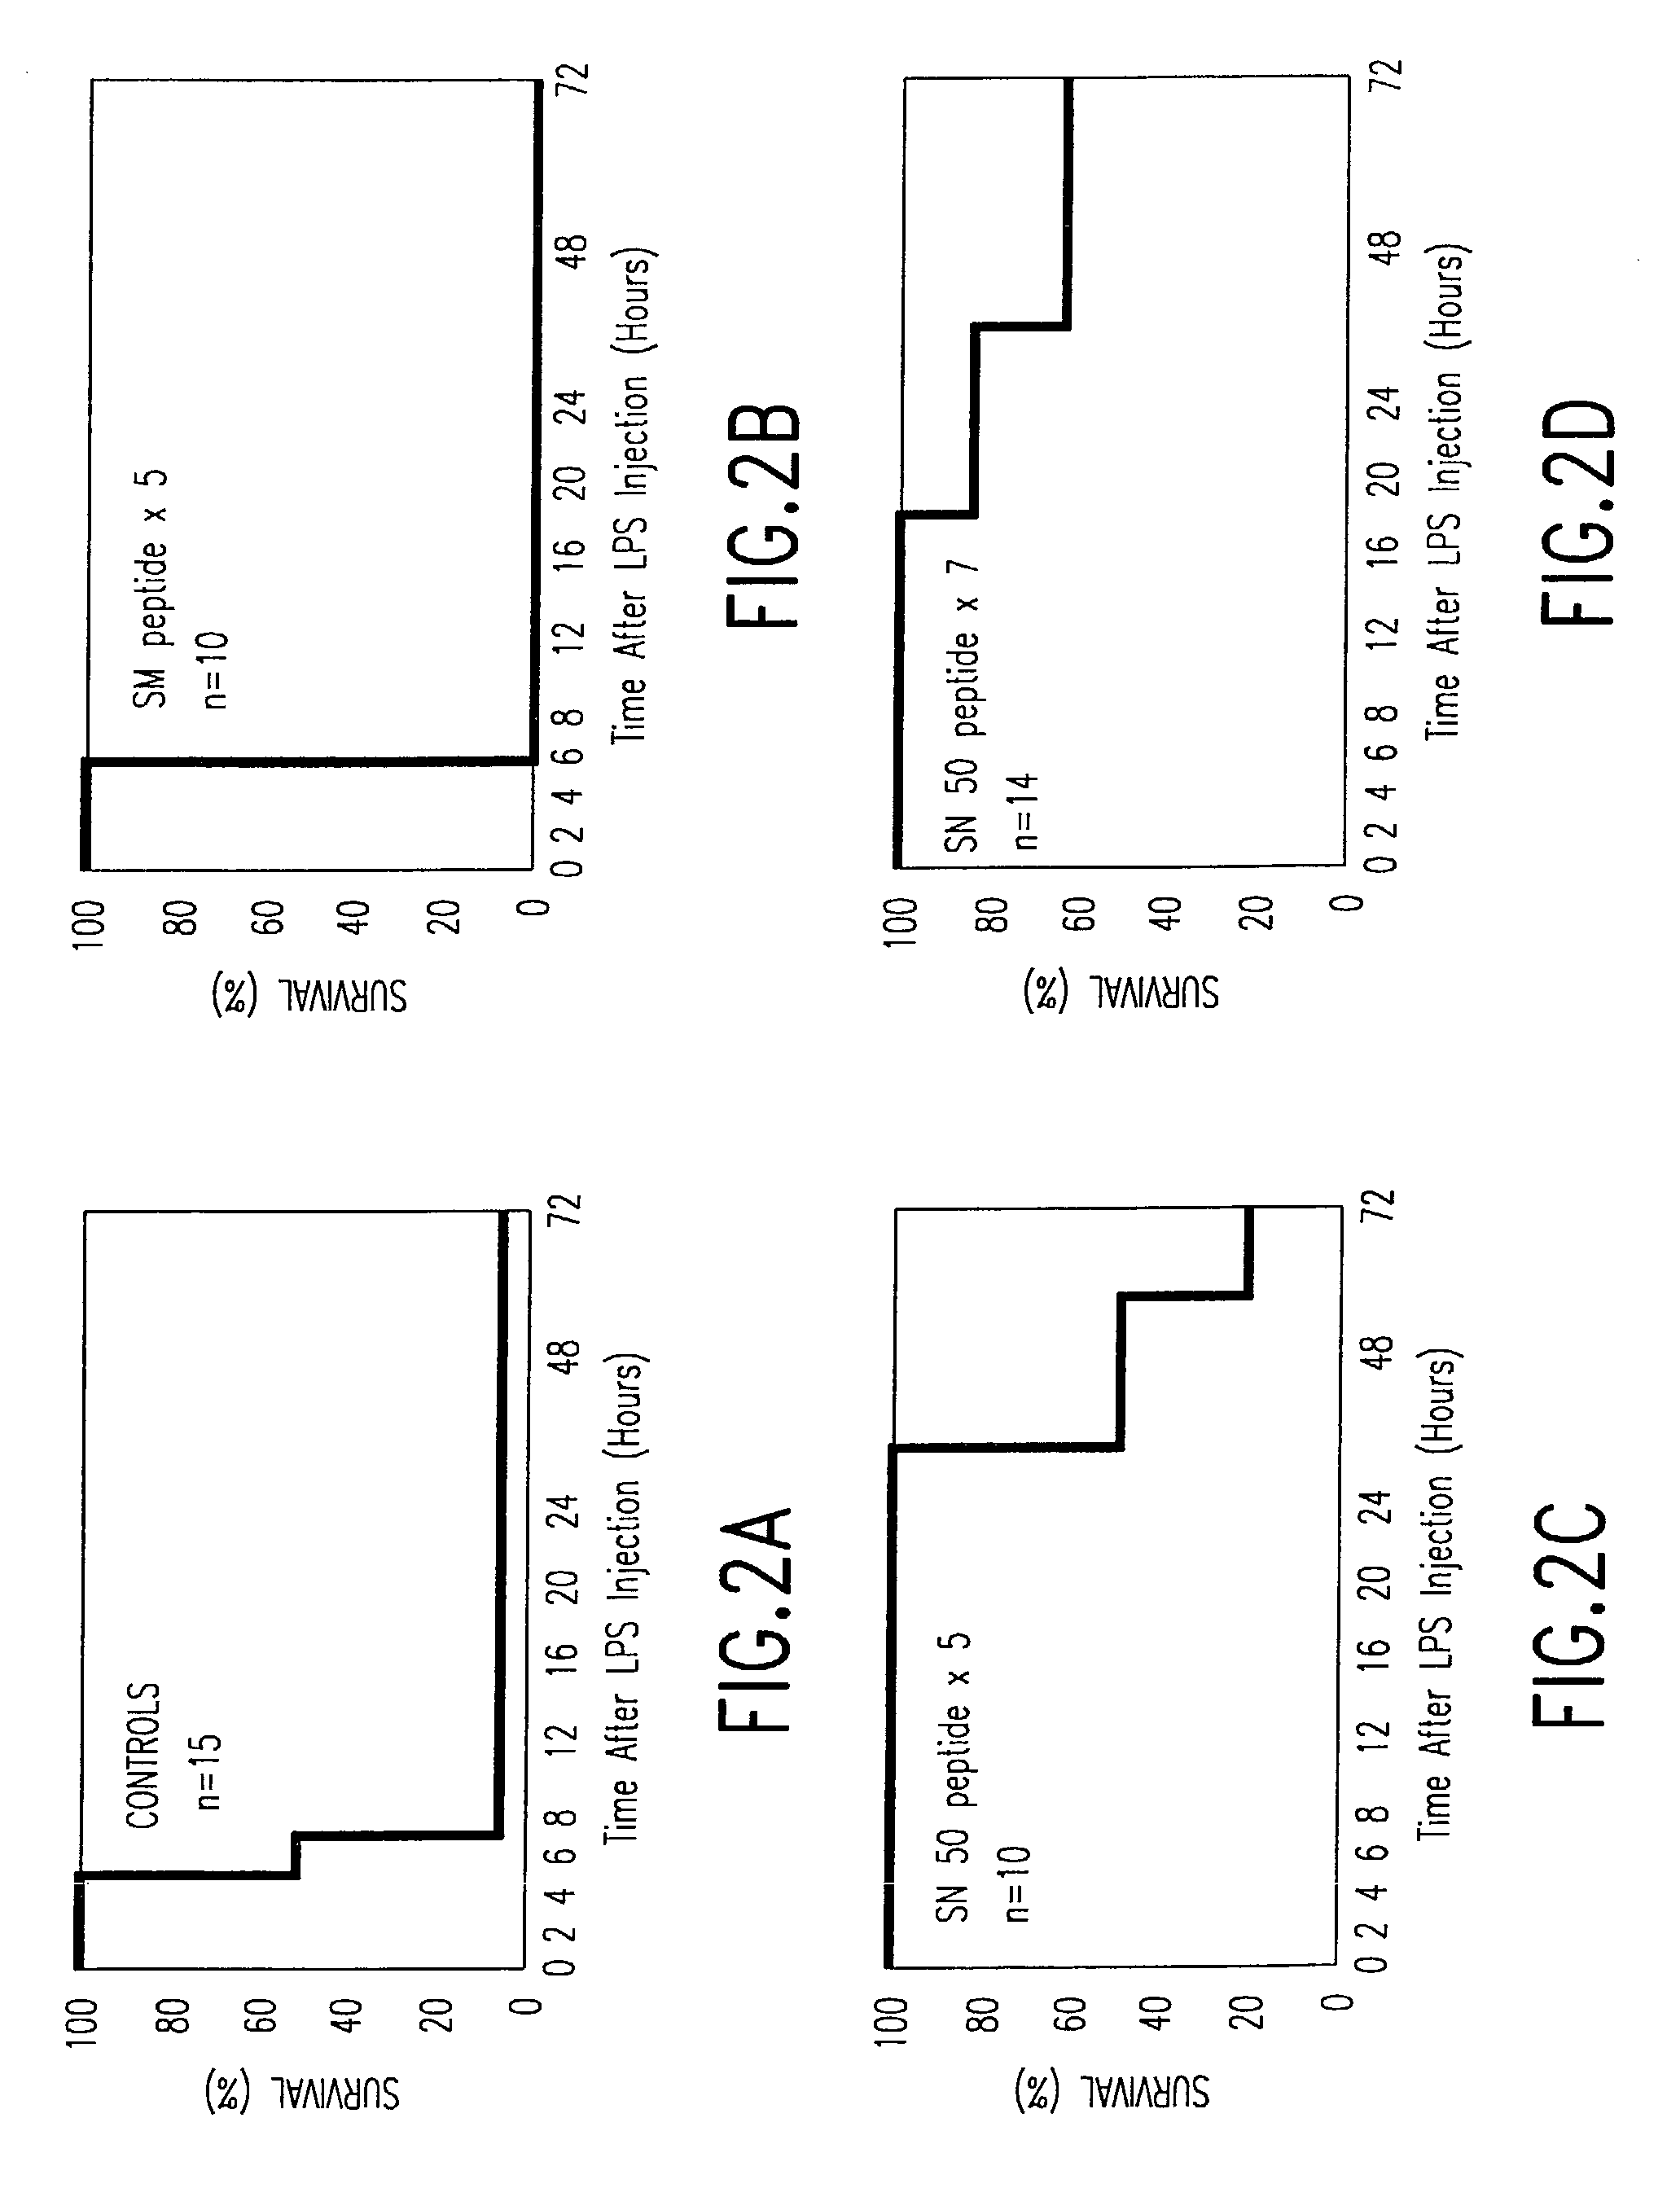 Compositions for importing biologically active molecules into cells